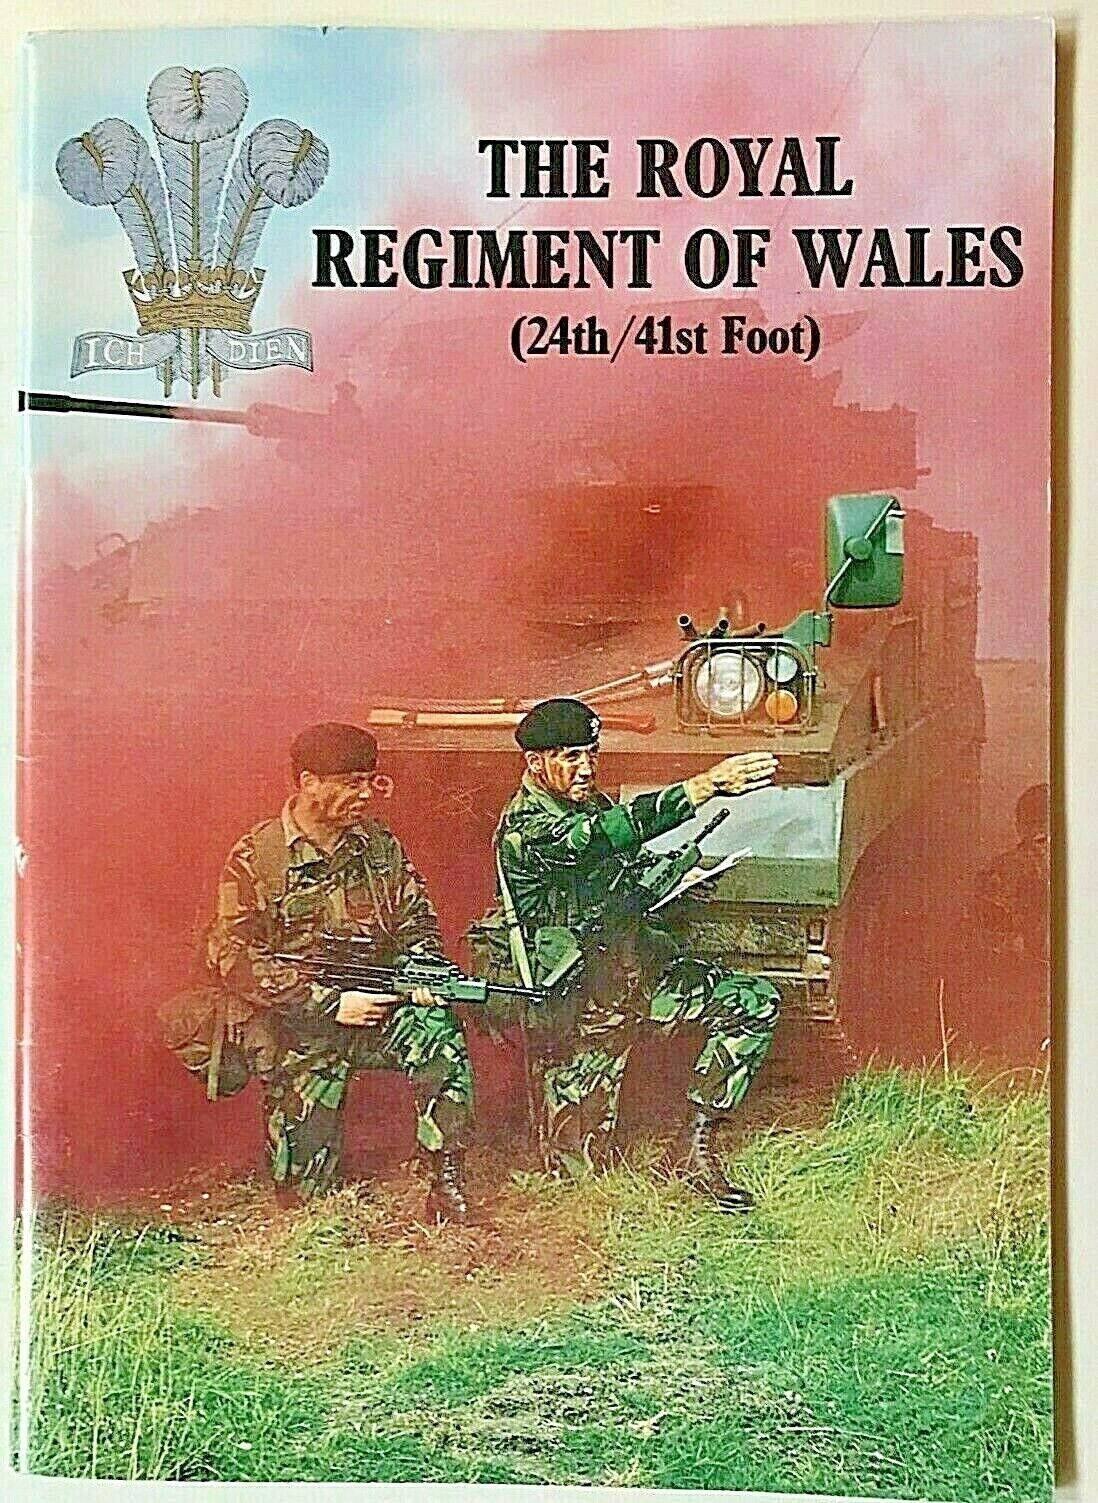 THE ROYAL REGIMENT OF WALES (24TH/41ST FOOT) UNIT HISTORY BOOK 1689-1989